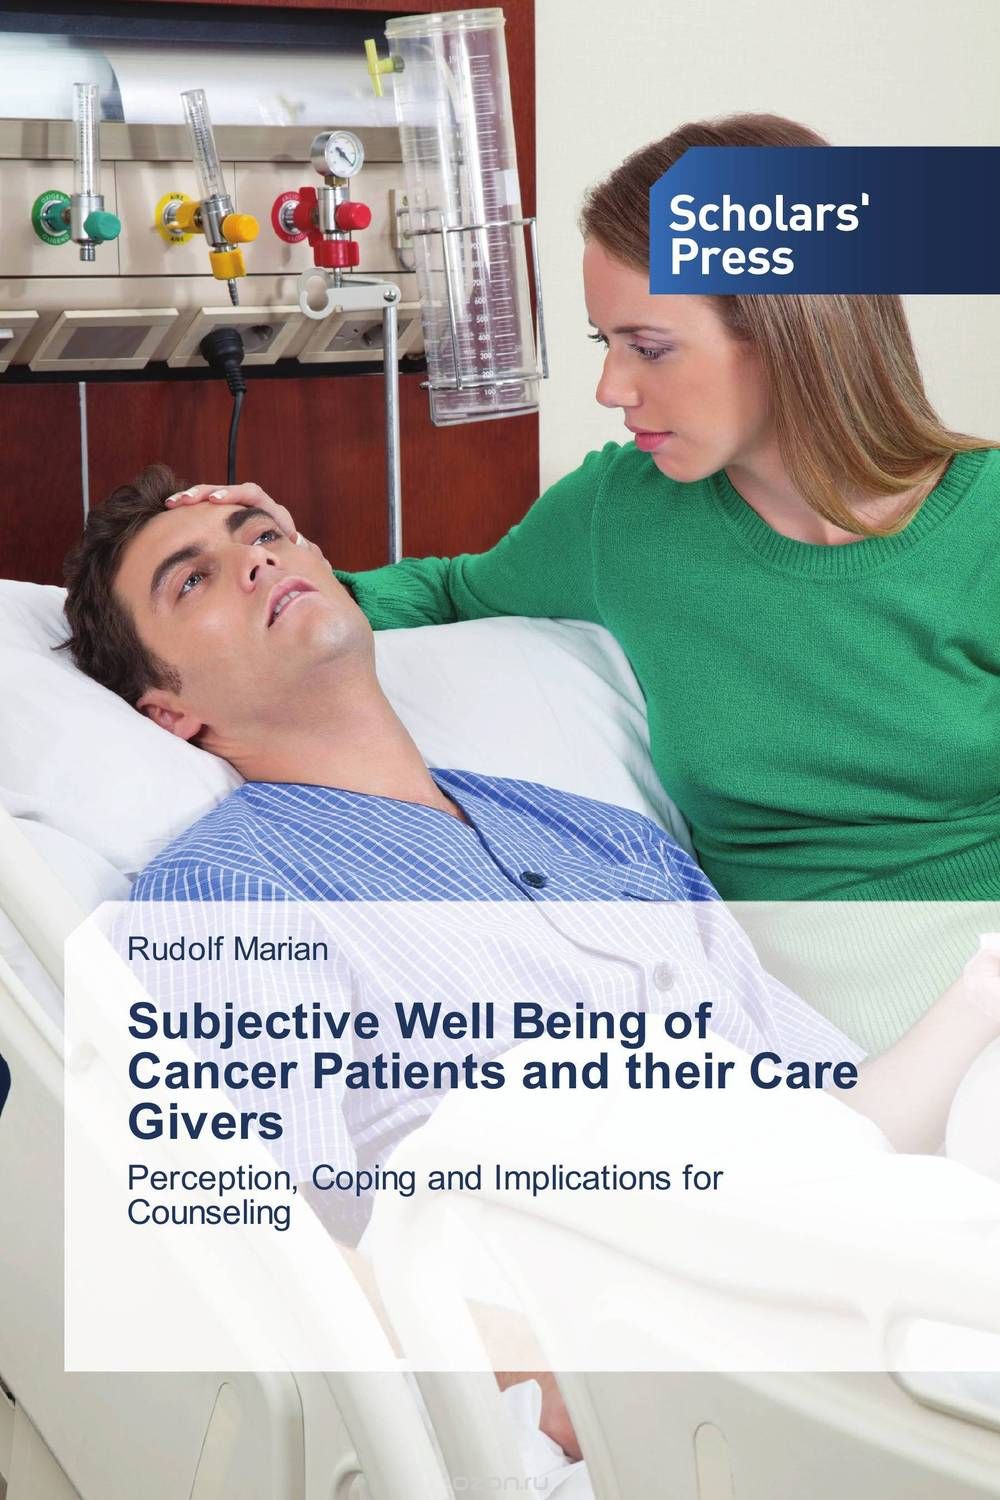 Скачать книгу "Subjective Well Being of Cancer Patients and their Care Givers"